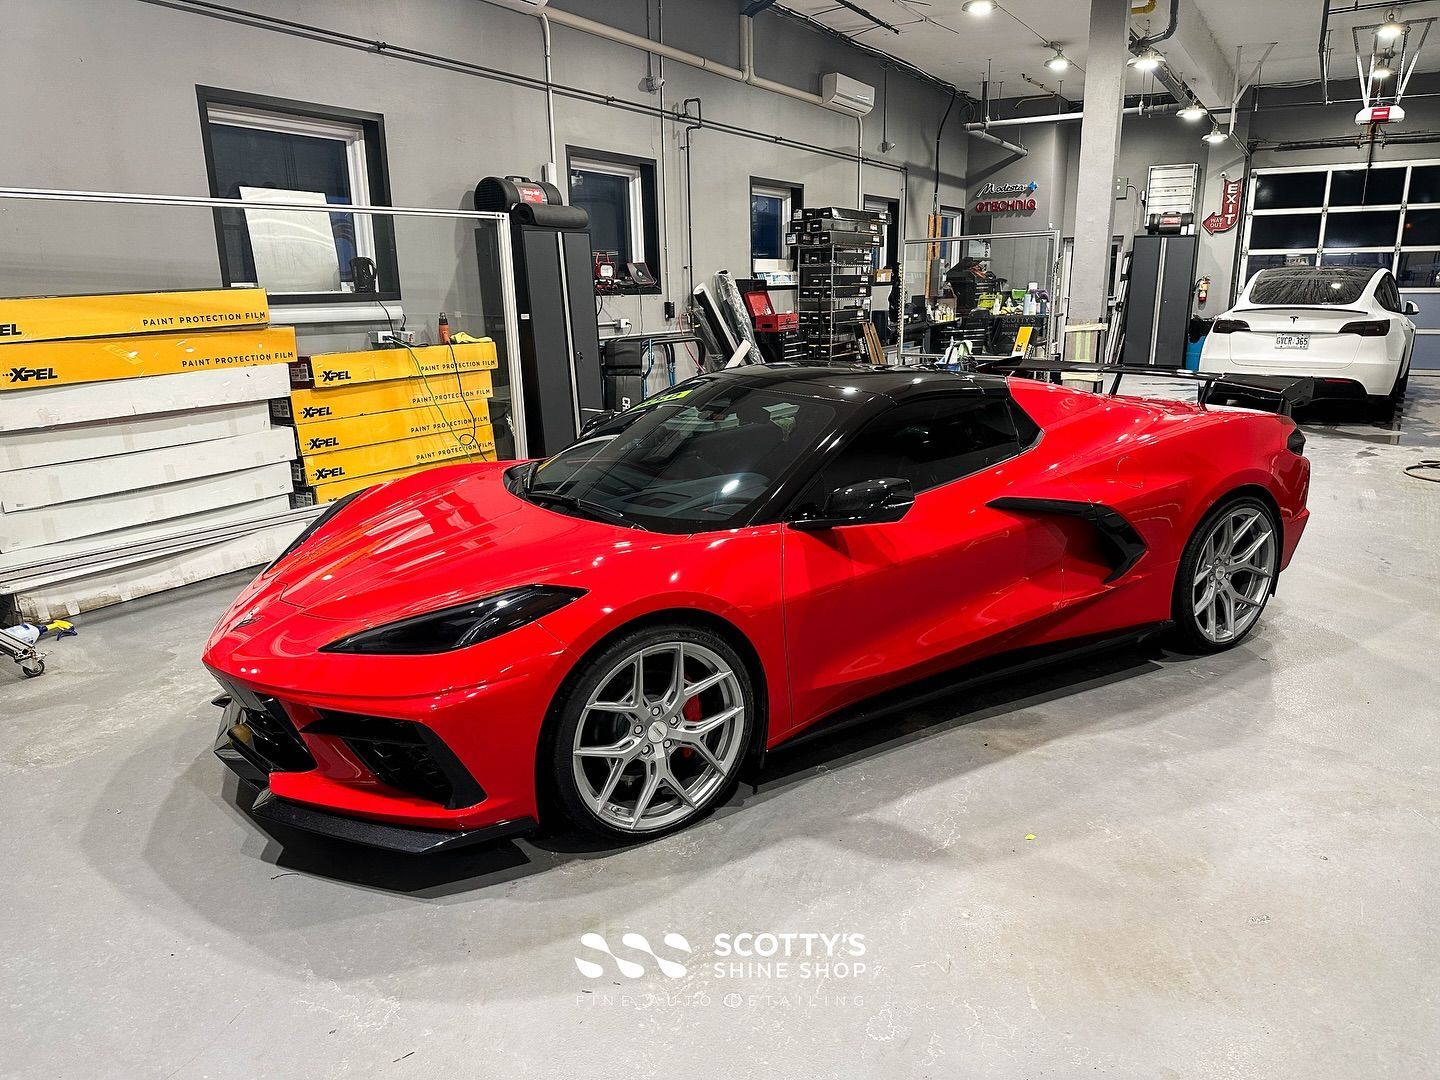 Chevrolet Corvette Full Body Coverage with Xpel Ultimate Plus Paint Protection Film, Xpel Prime XR Plus Window Film and now ready for Xpel Fusion Ceramic Coatings on the Body, Wheels and Glass London, Canada